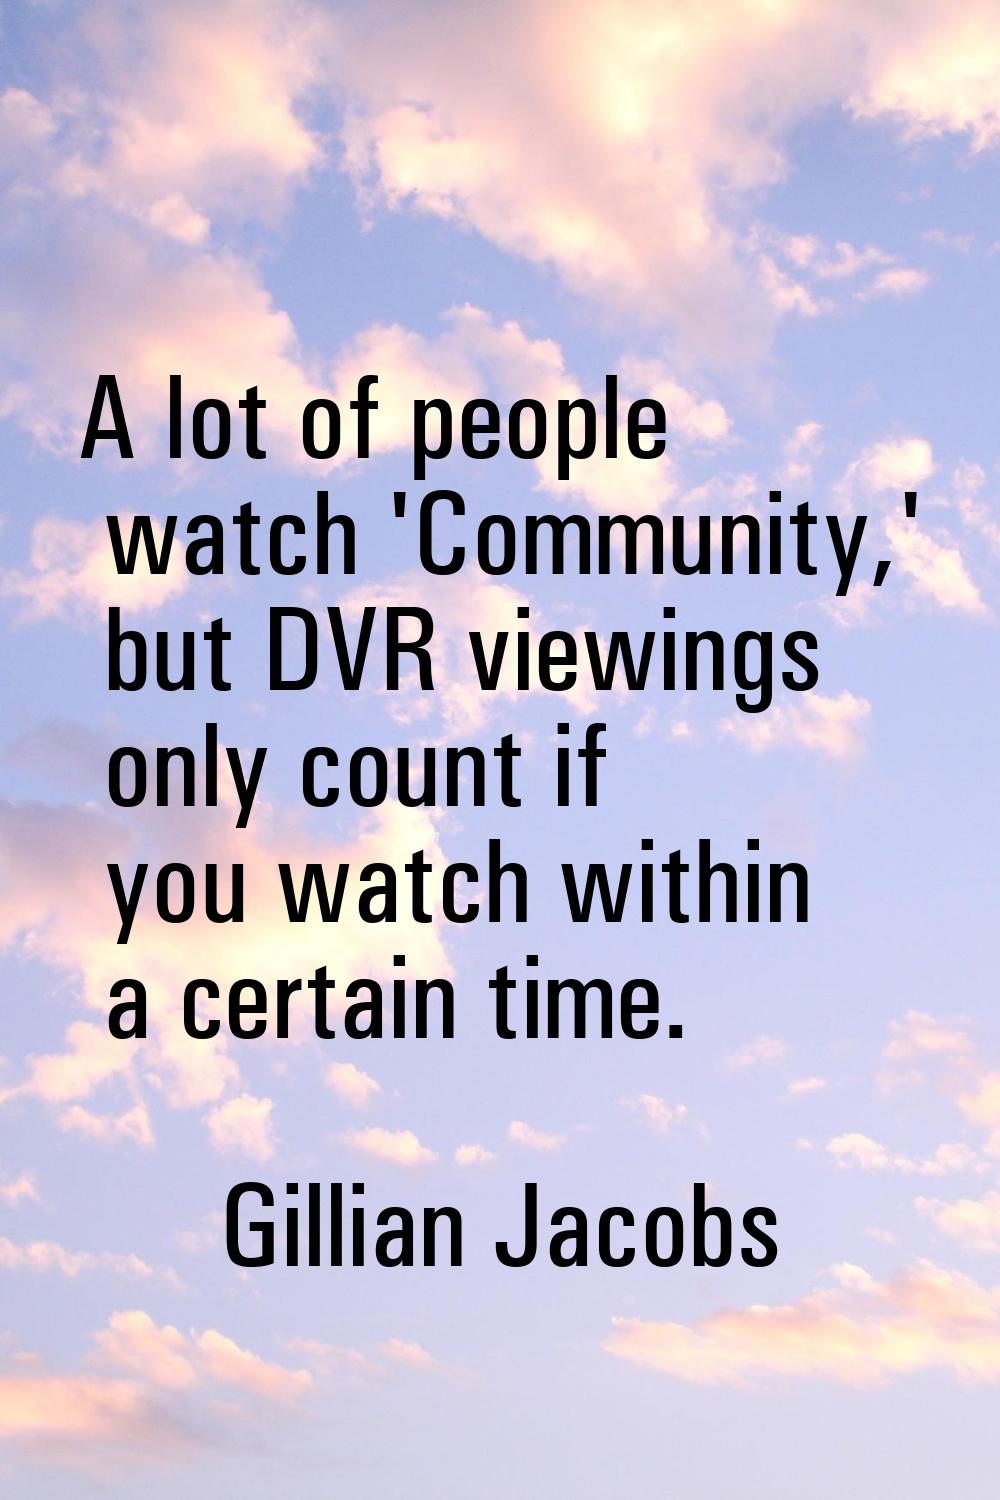 A lot of people watch 'Community,' but DVR viewings only count if you watch within a certain time.